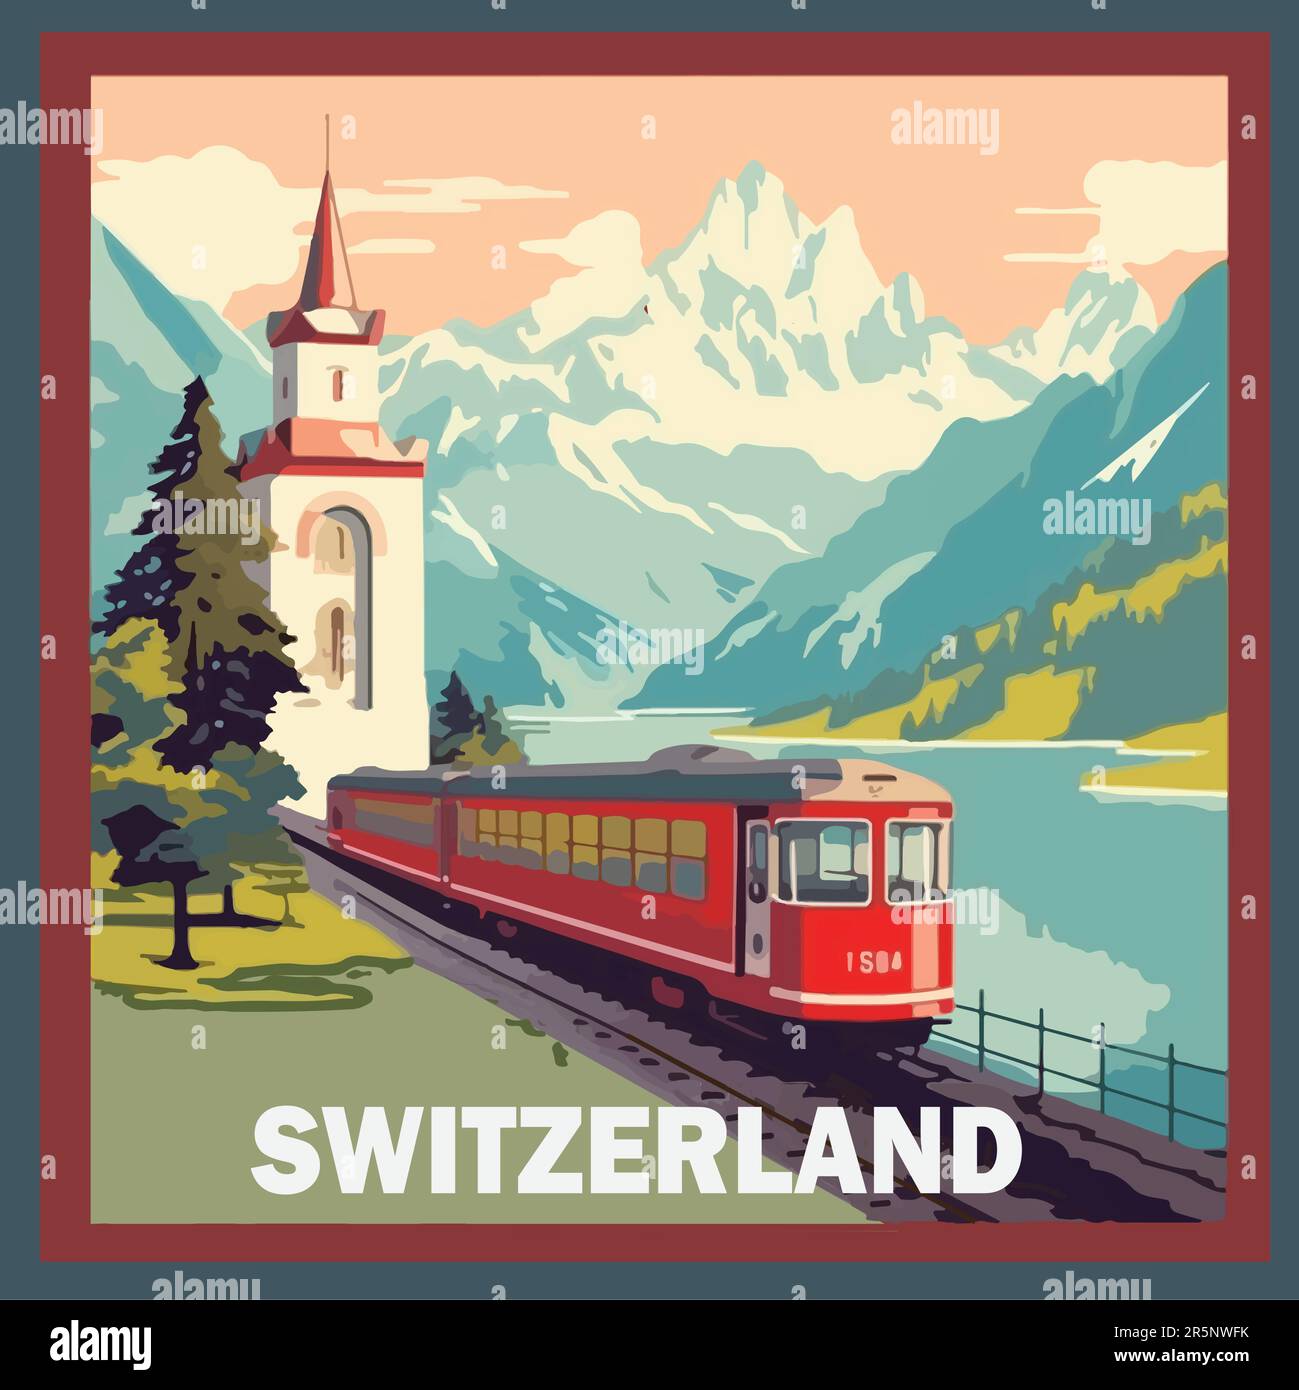 Vintage 1930s travel style poster for Switzerland, railway, Alps, scenic view Stock Vector